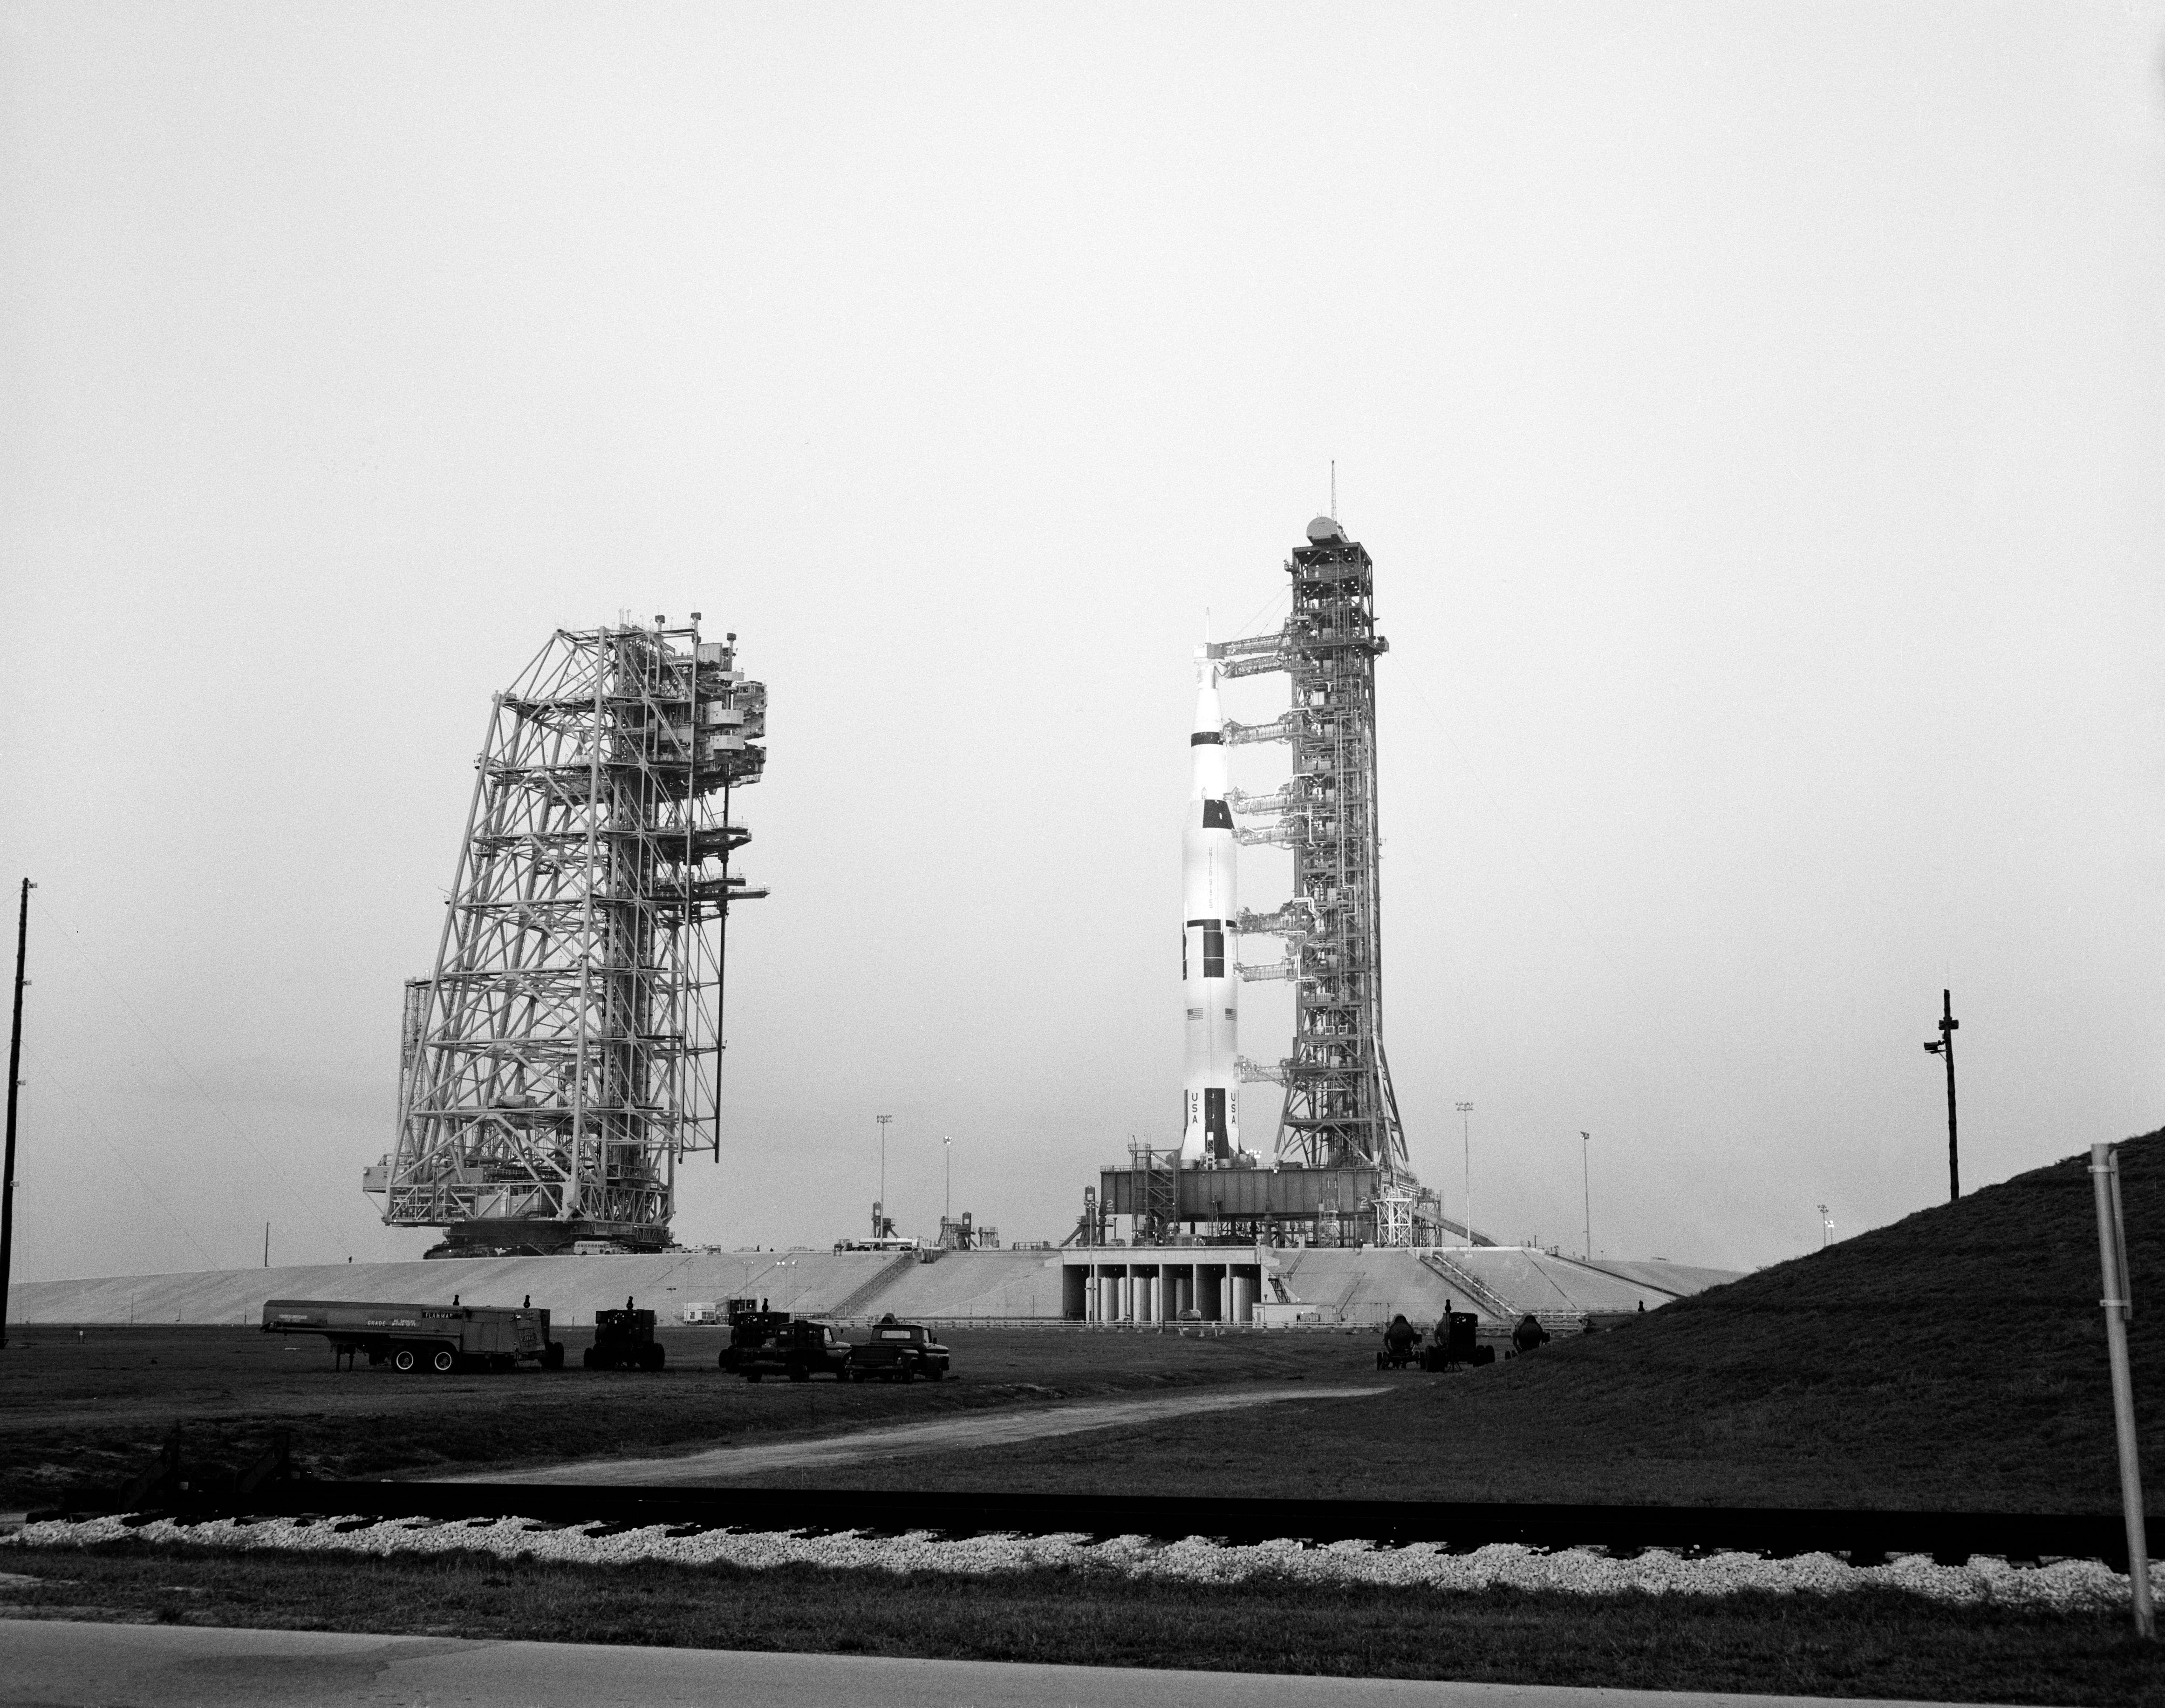 The Apollo 9 Saturn V at Launch Pad 39A at NASA’s Kennedy Space Center in Florida during the Countdown Demonstration Test (CDDT)